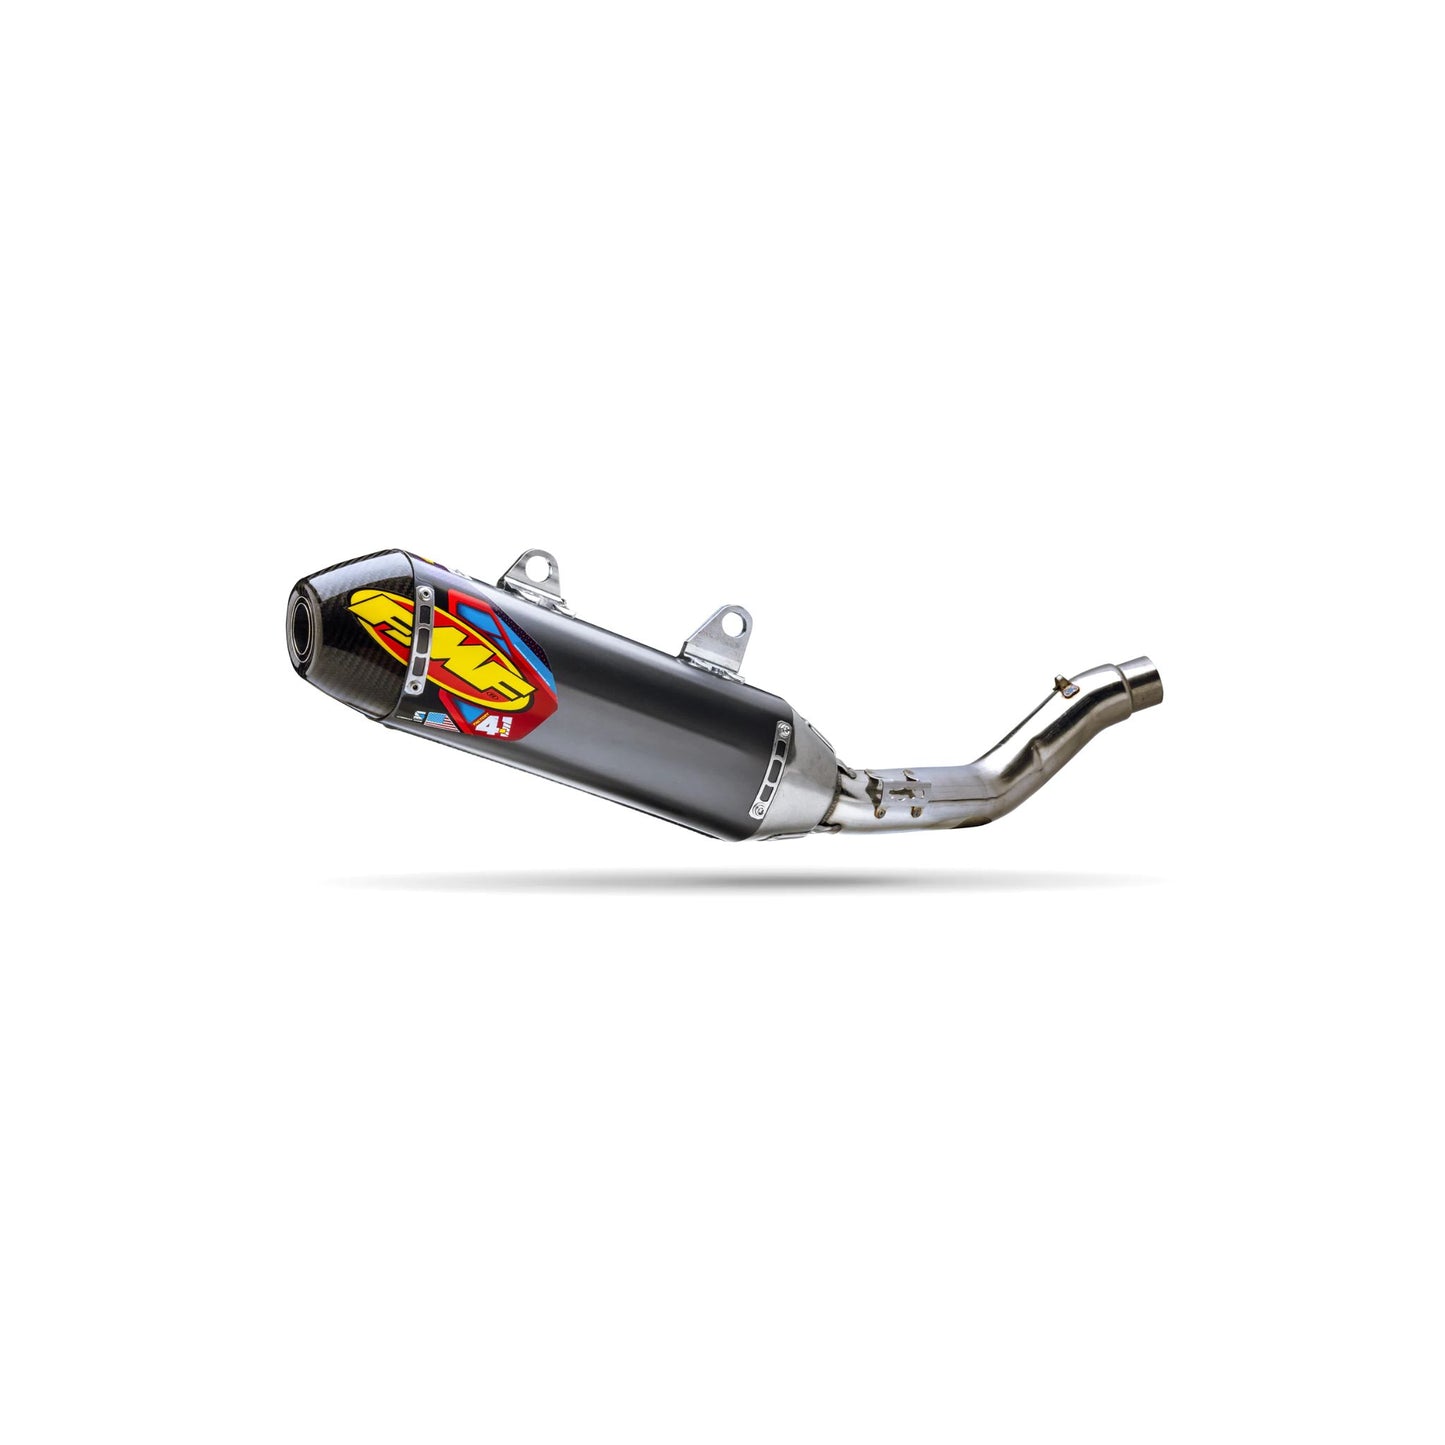 FACTORY 4.1 RCT STAINLESS SL (SLIP-ON) W/ CARBON END CAP 041610 CRF250R 22-24